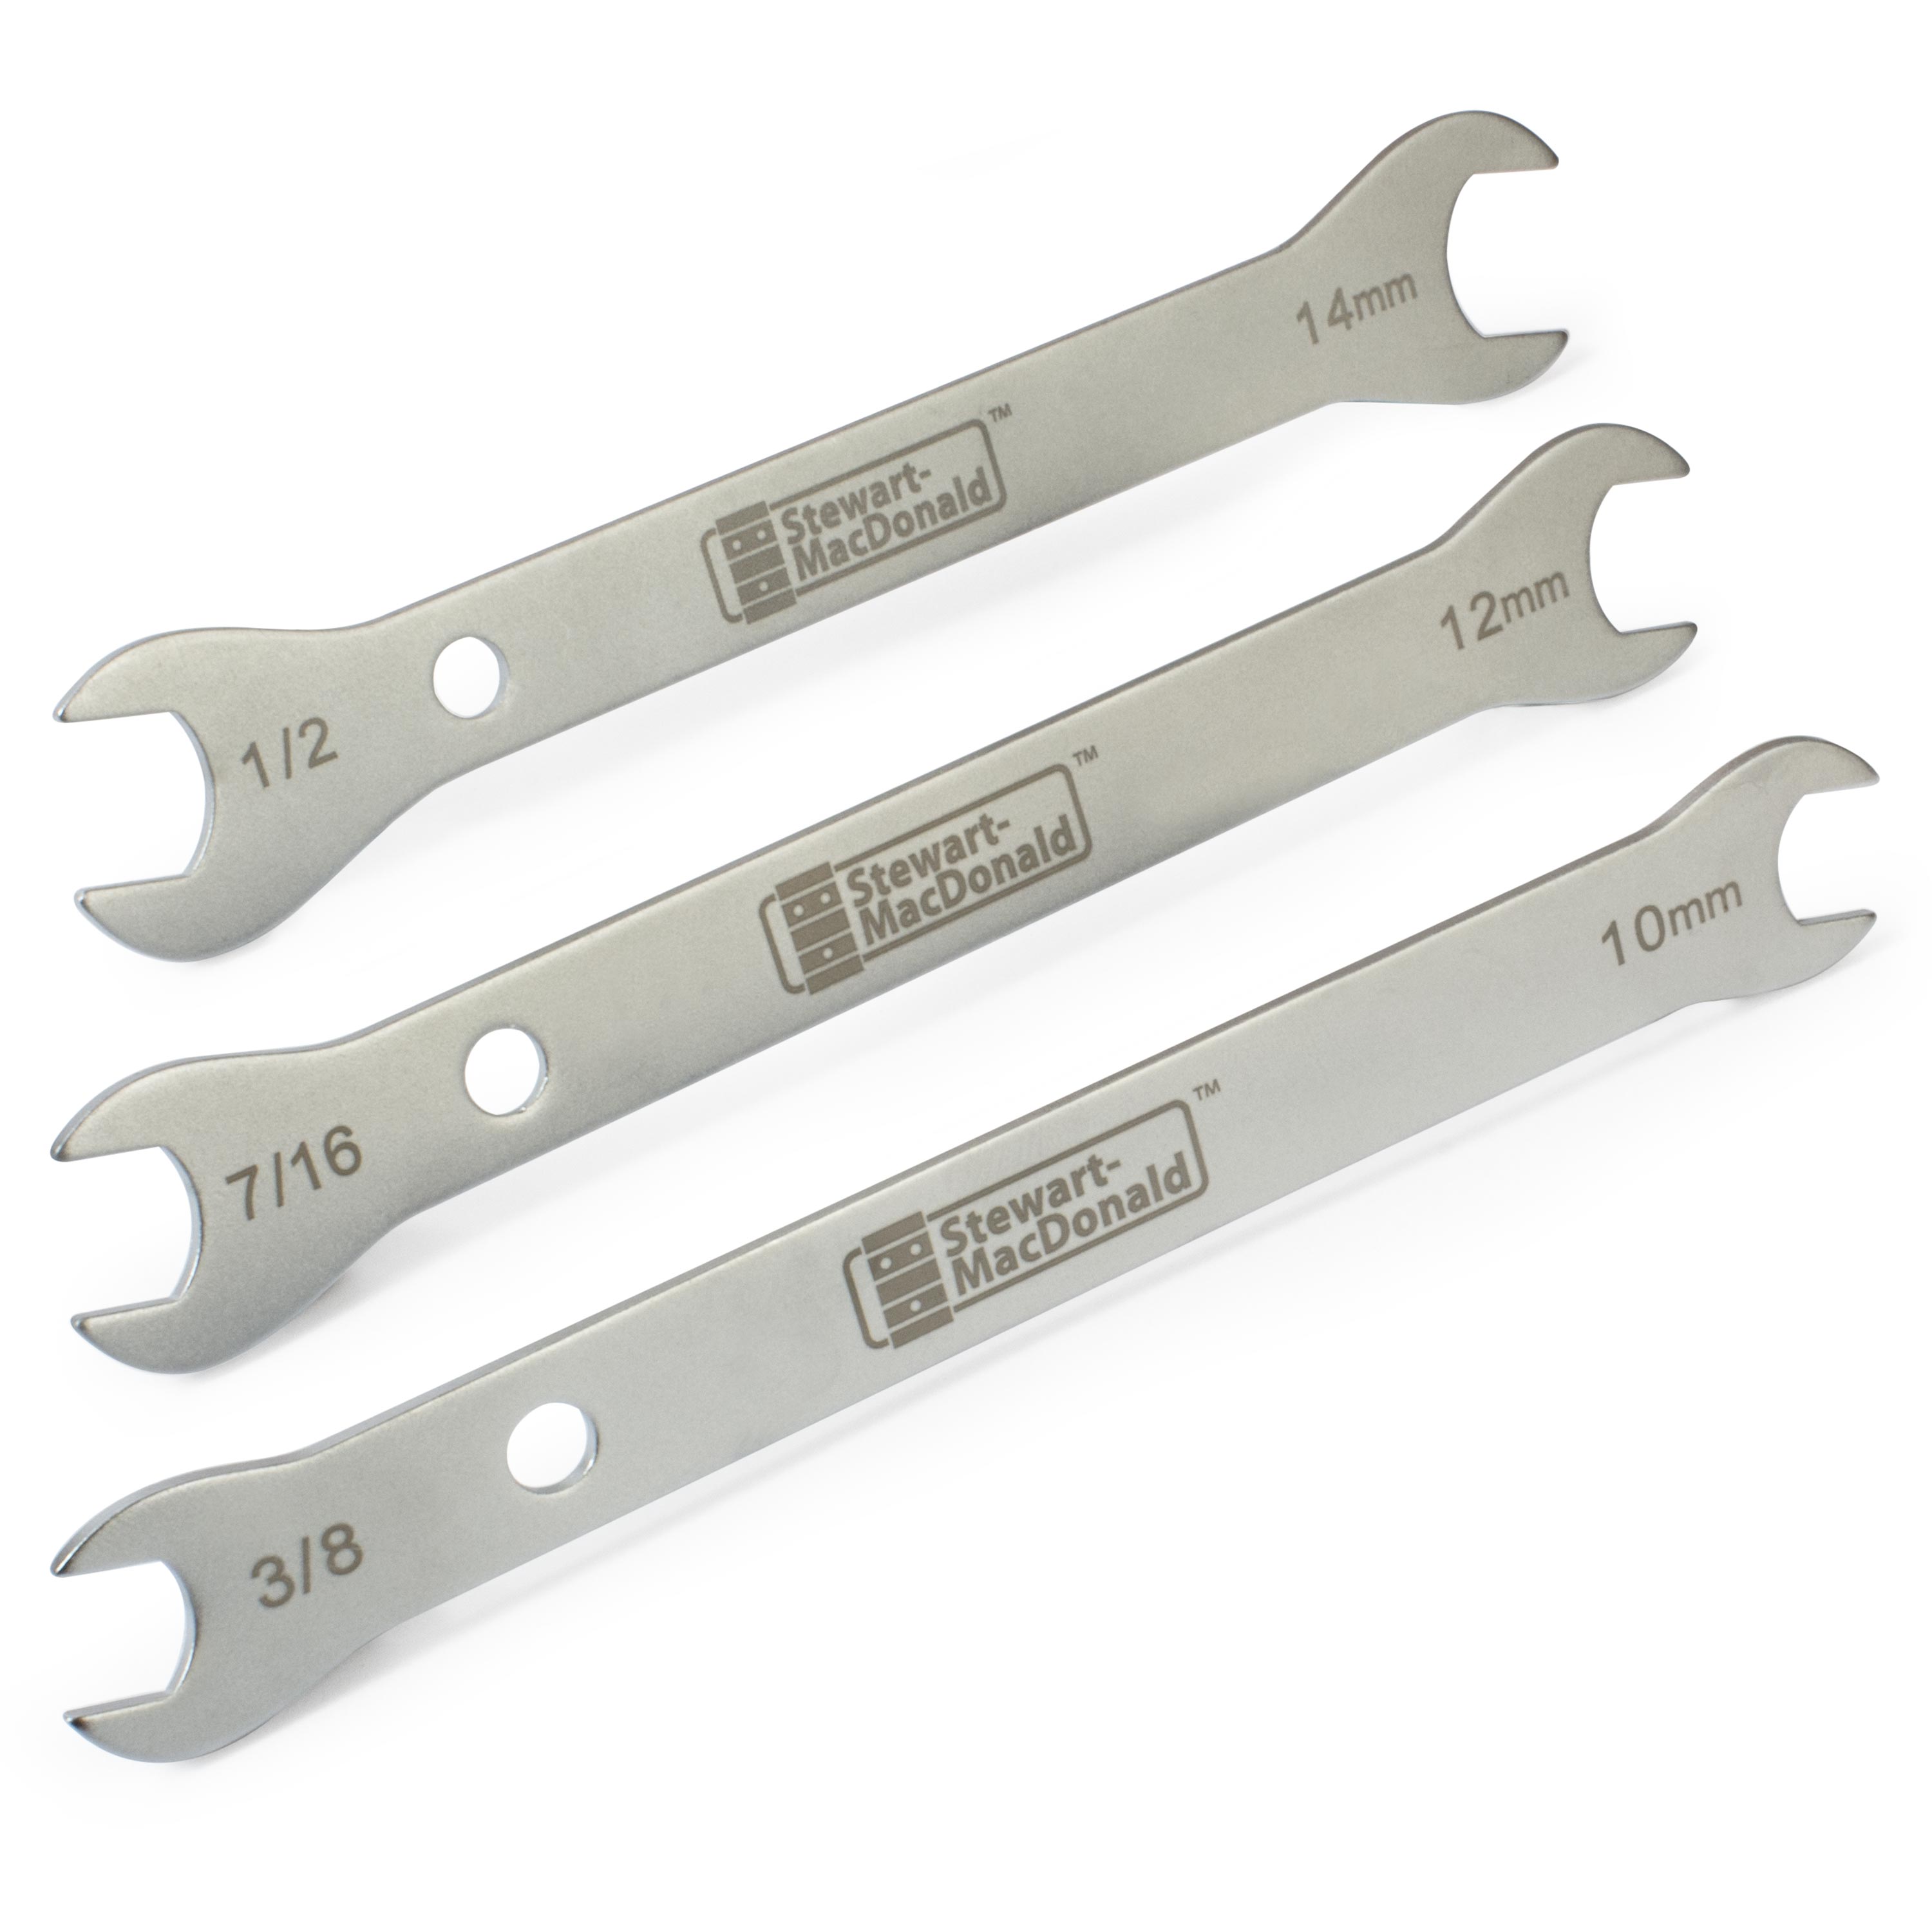 https://www.stewmac.com/globalassets/product-images/m003000/m003300/m003374-guitar-tech-wrench-set/variant/3691-1-on-white-3000.jpg?hash=637621474340000000